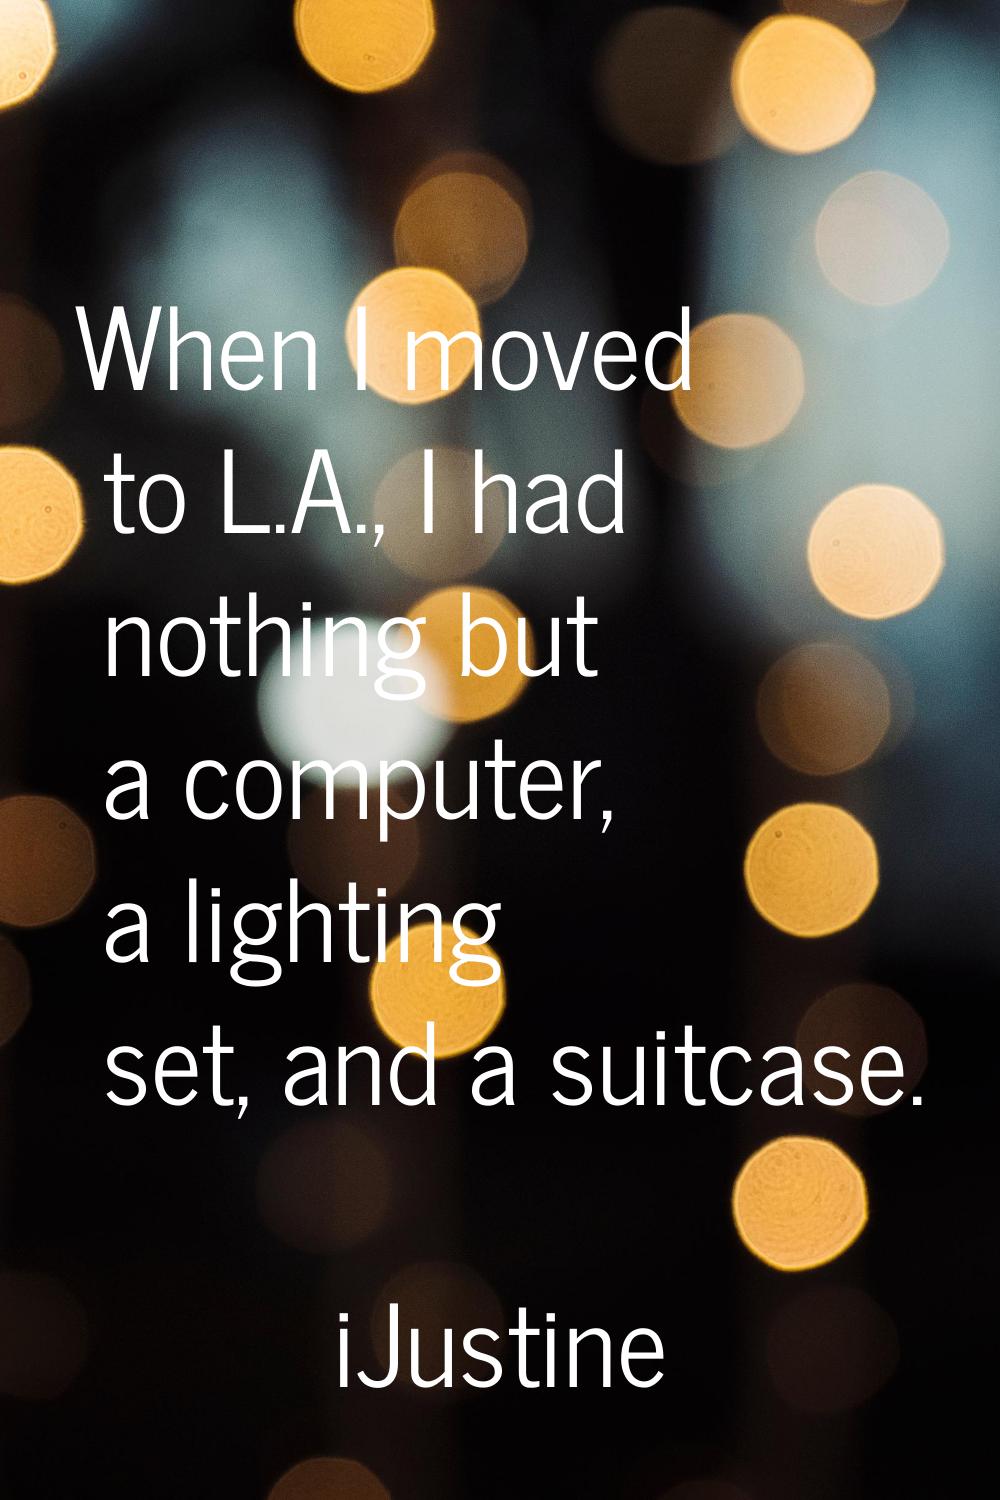 When I moved to L.A., I had nothing but a computer, a lighting set, and a suitcase.